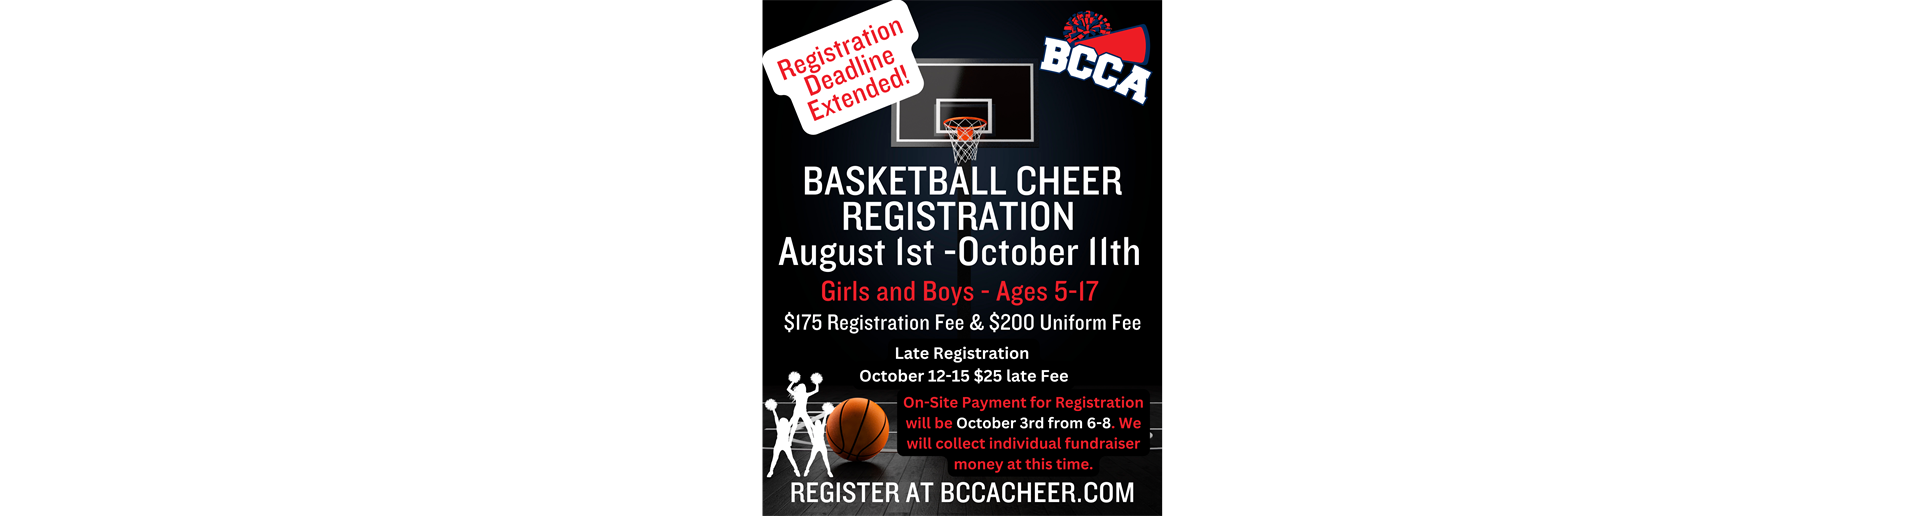 Basketball Cheer is open August 1st!